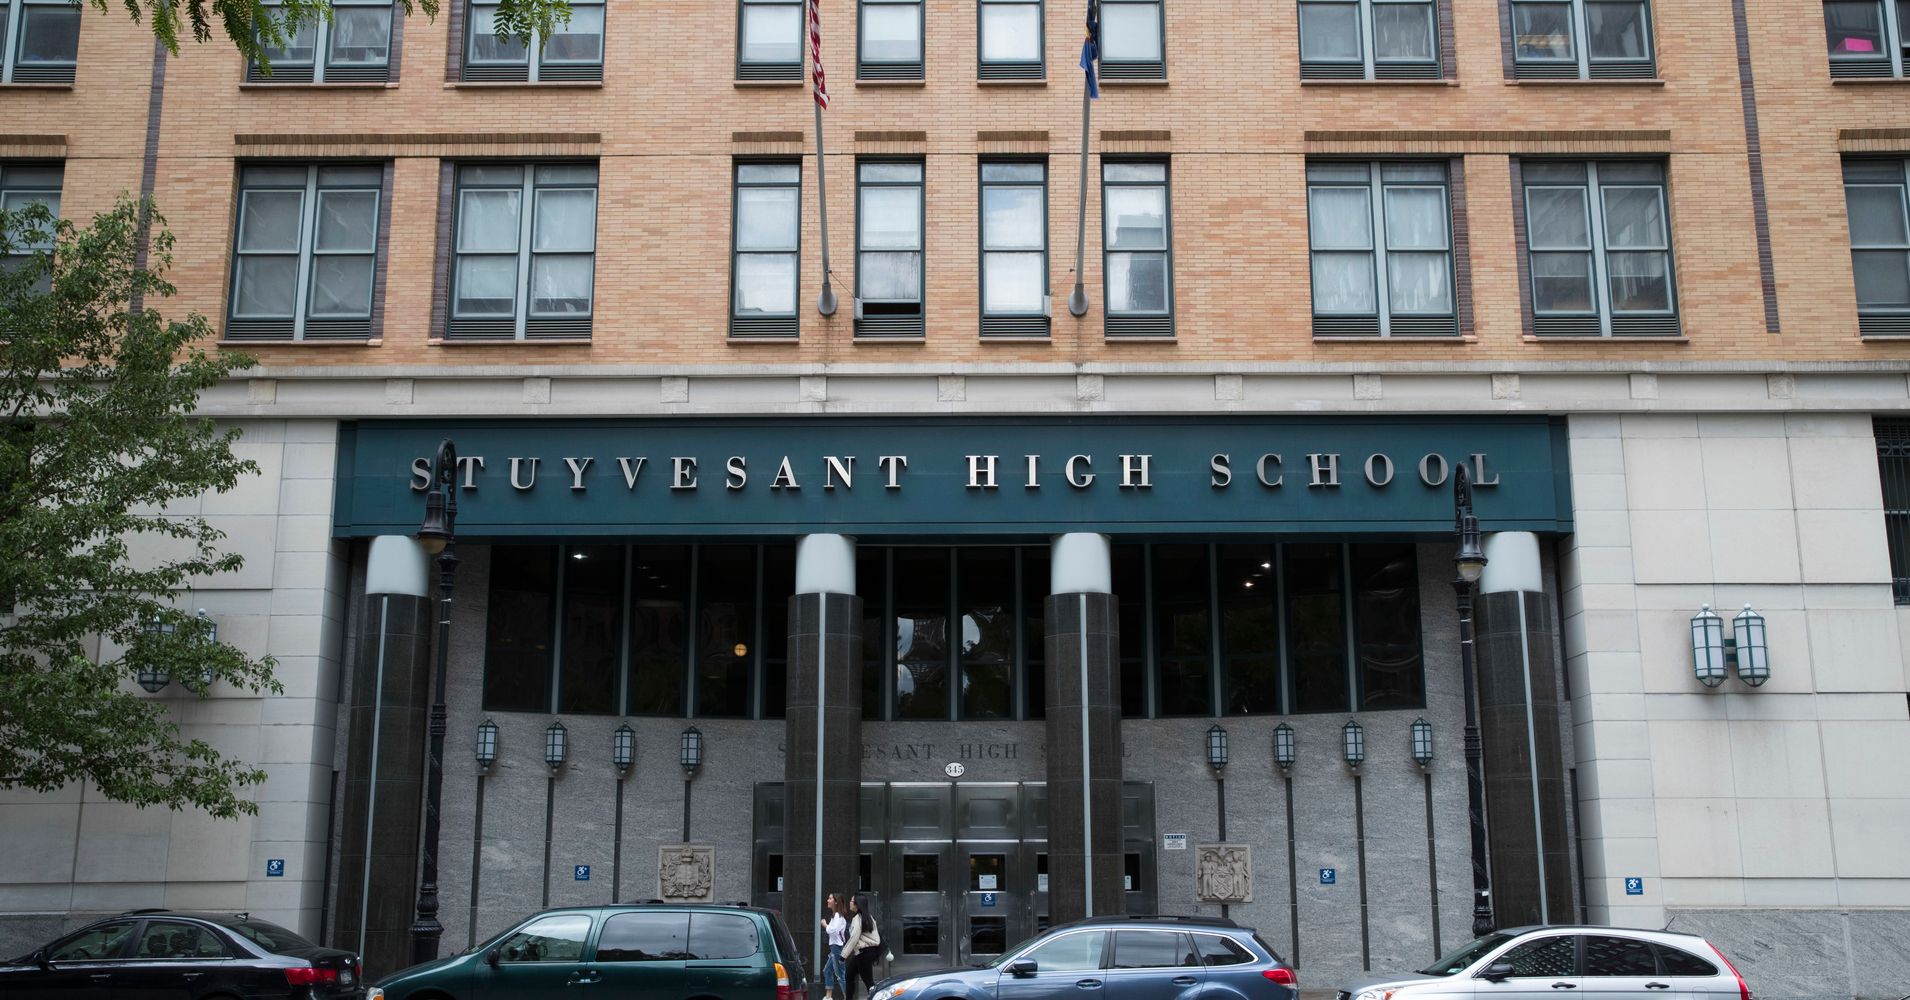 8 Elite Public Schools In NYC Only Accepted 190 Black Students The Boards